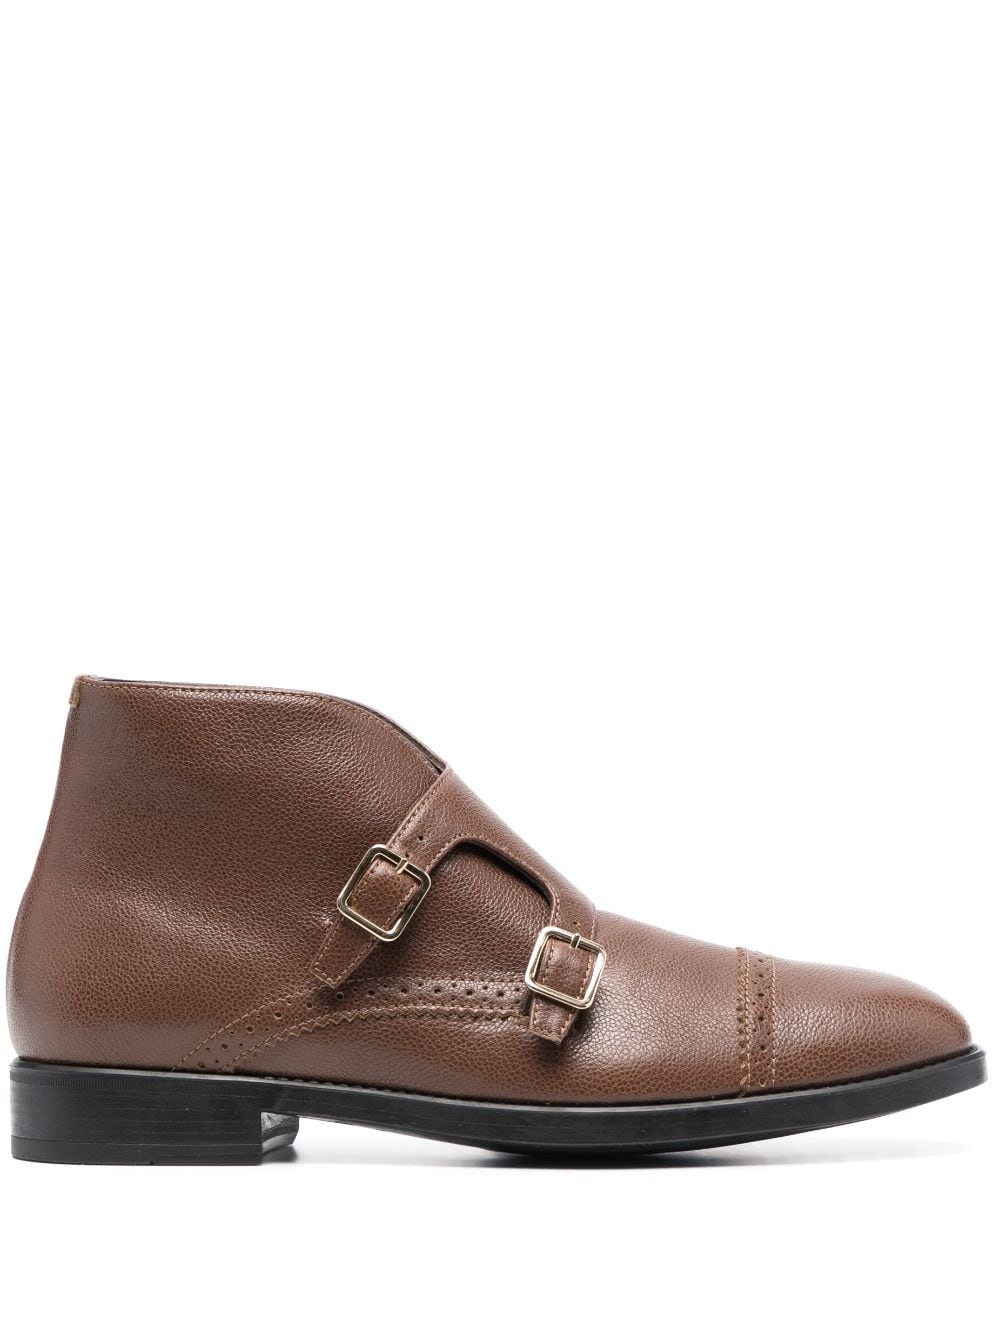 TOM FORD double-buckle monk shoes - Brown von TOM FORD